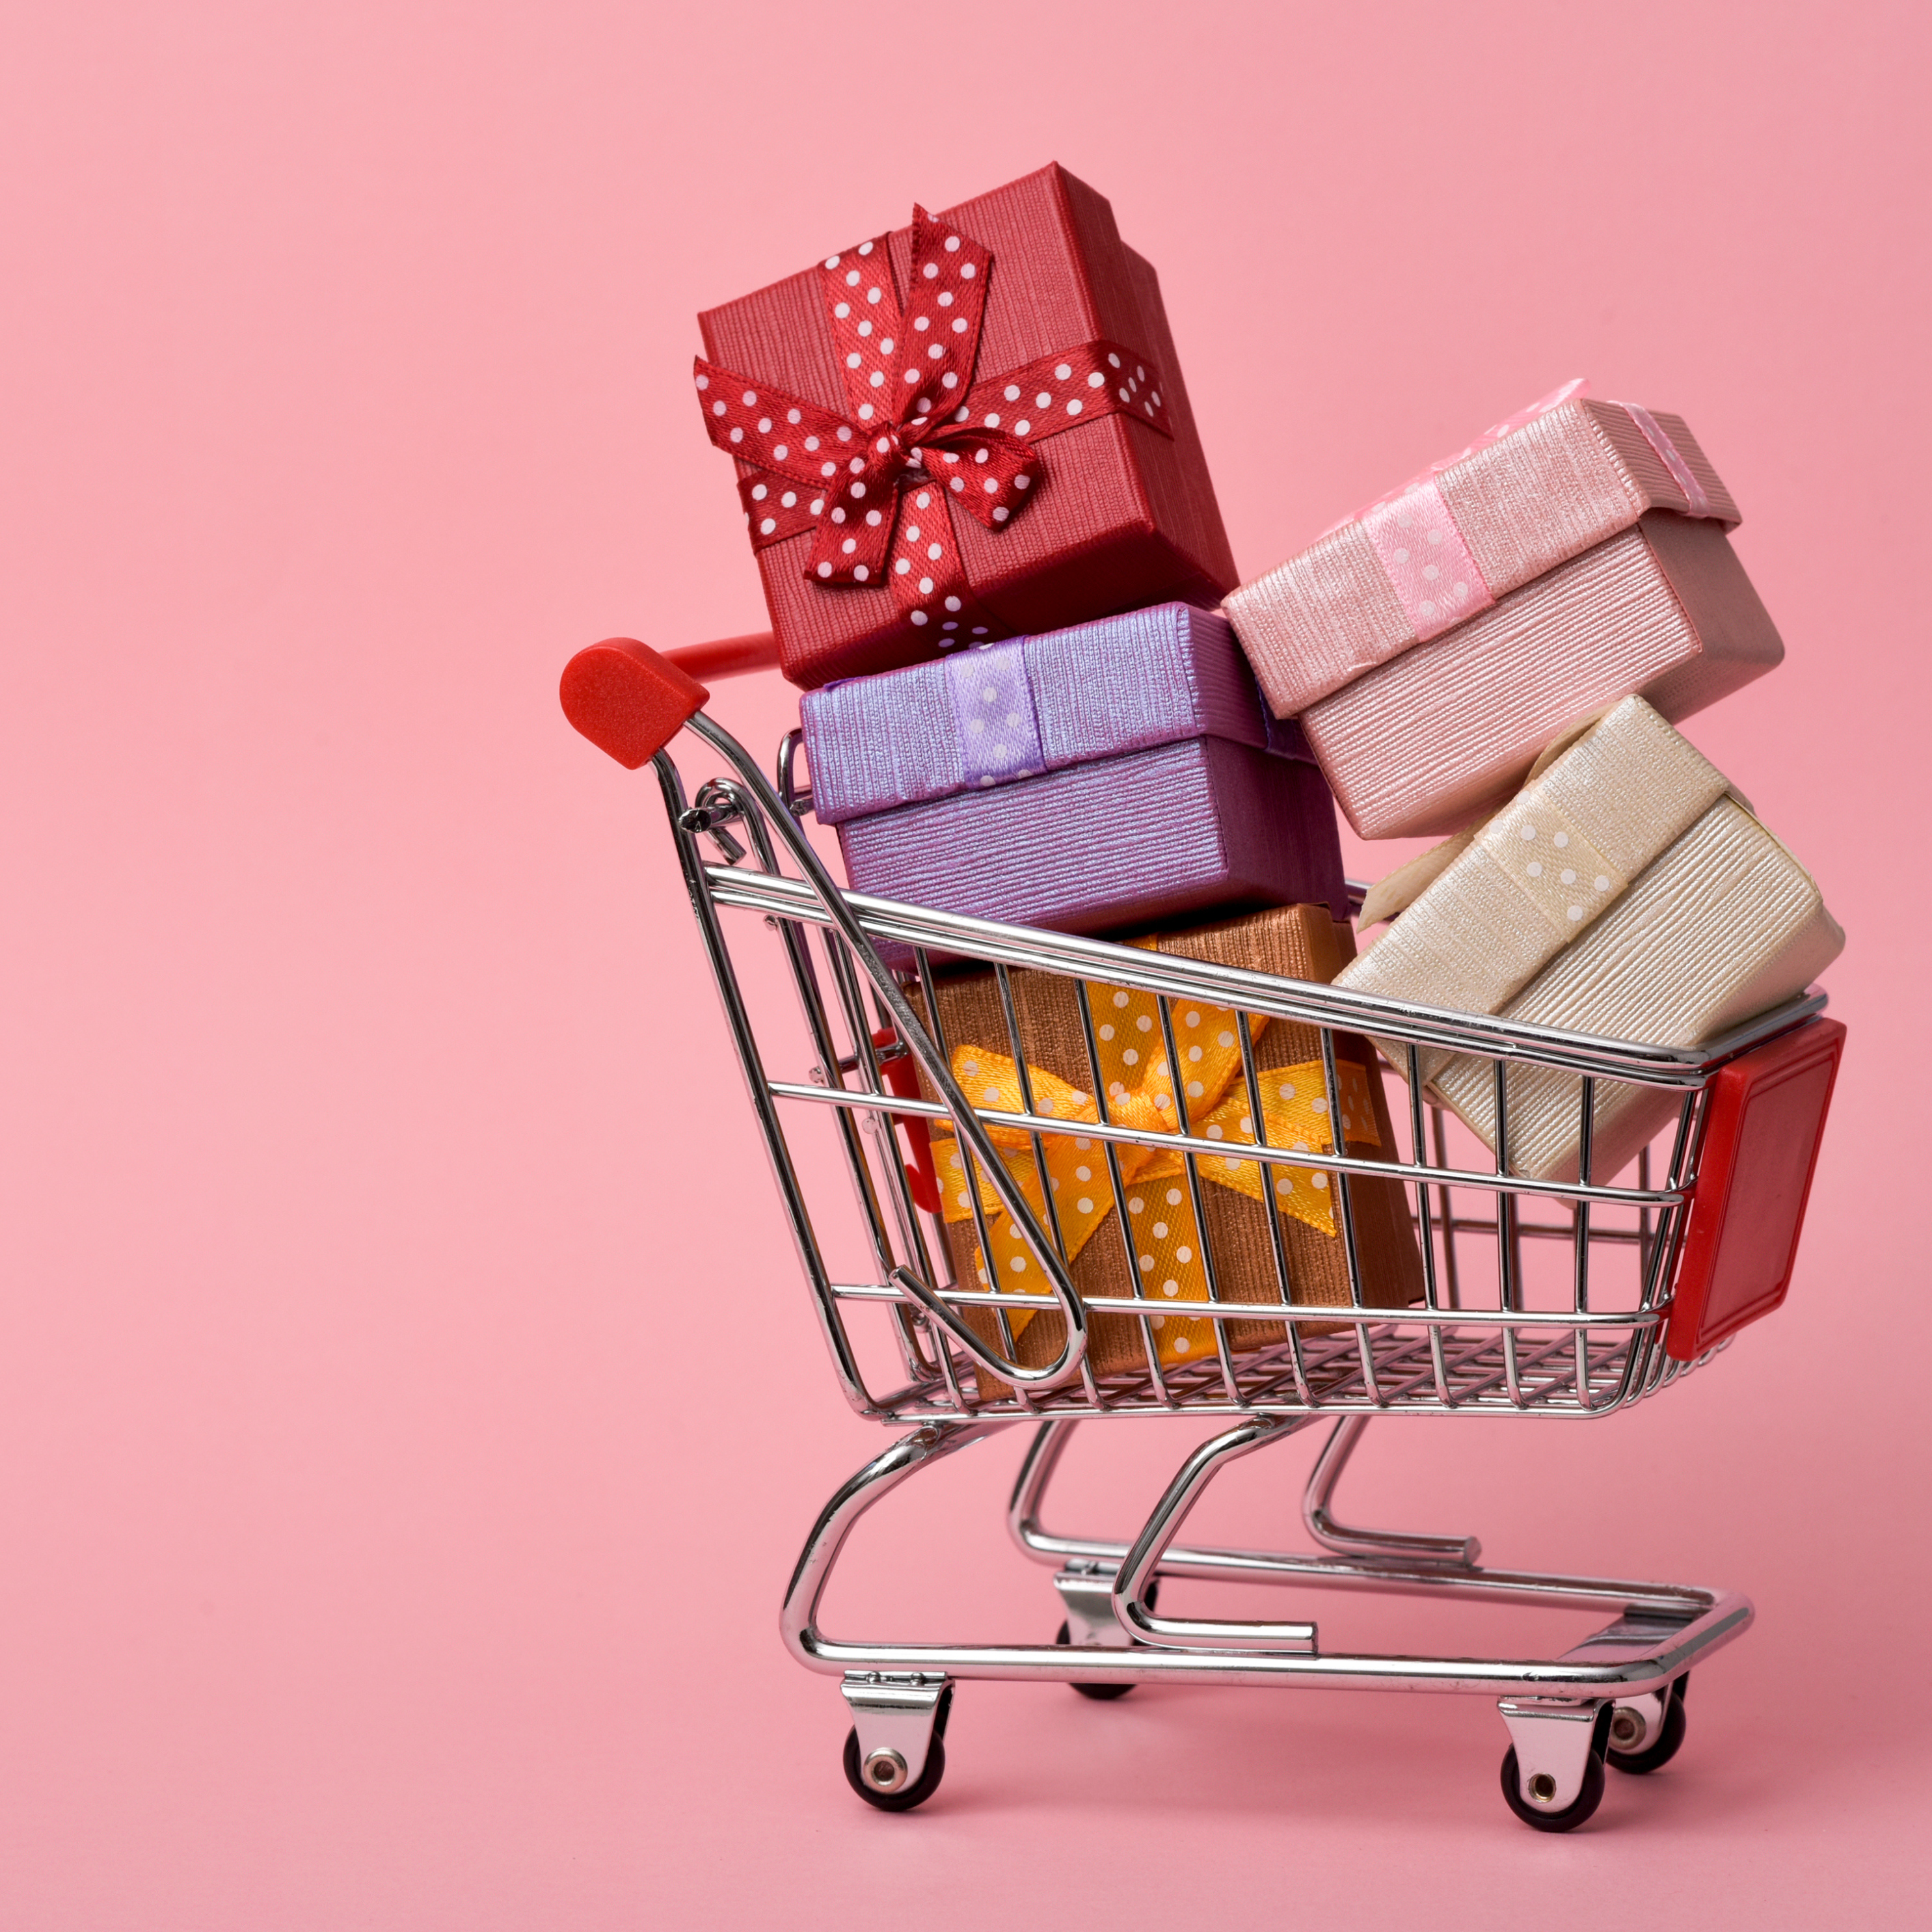 A shopping cart with gifts against a pink background